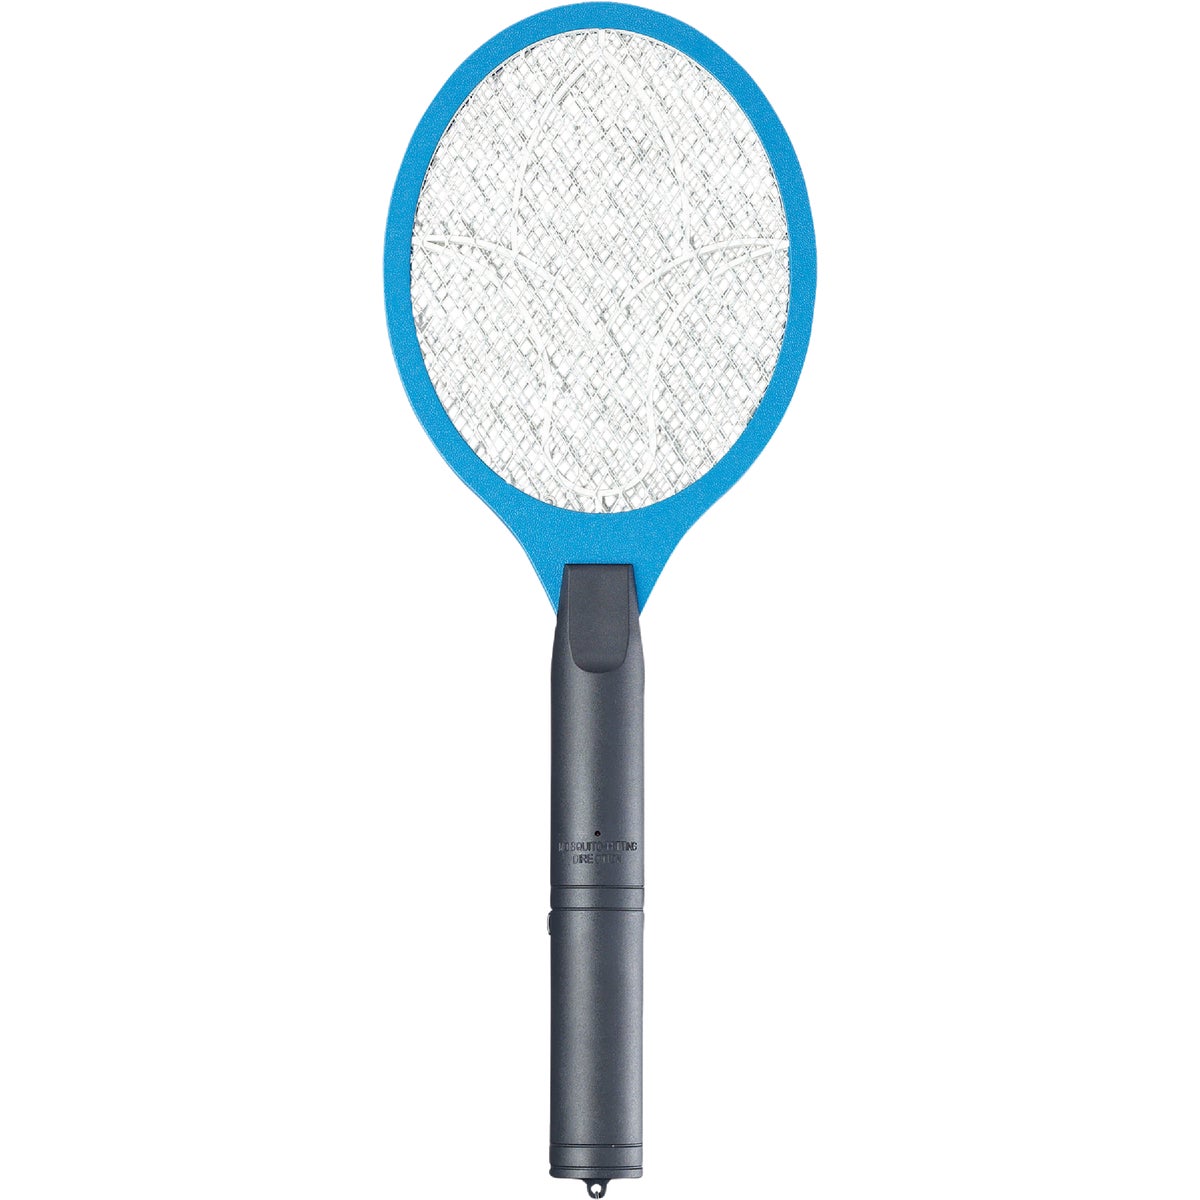 Item 719377, Innovative bug killer that looks like a tennis racquet but zaps mosquitoes